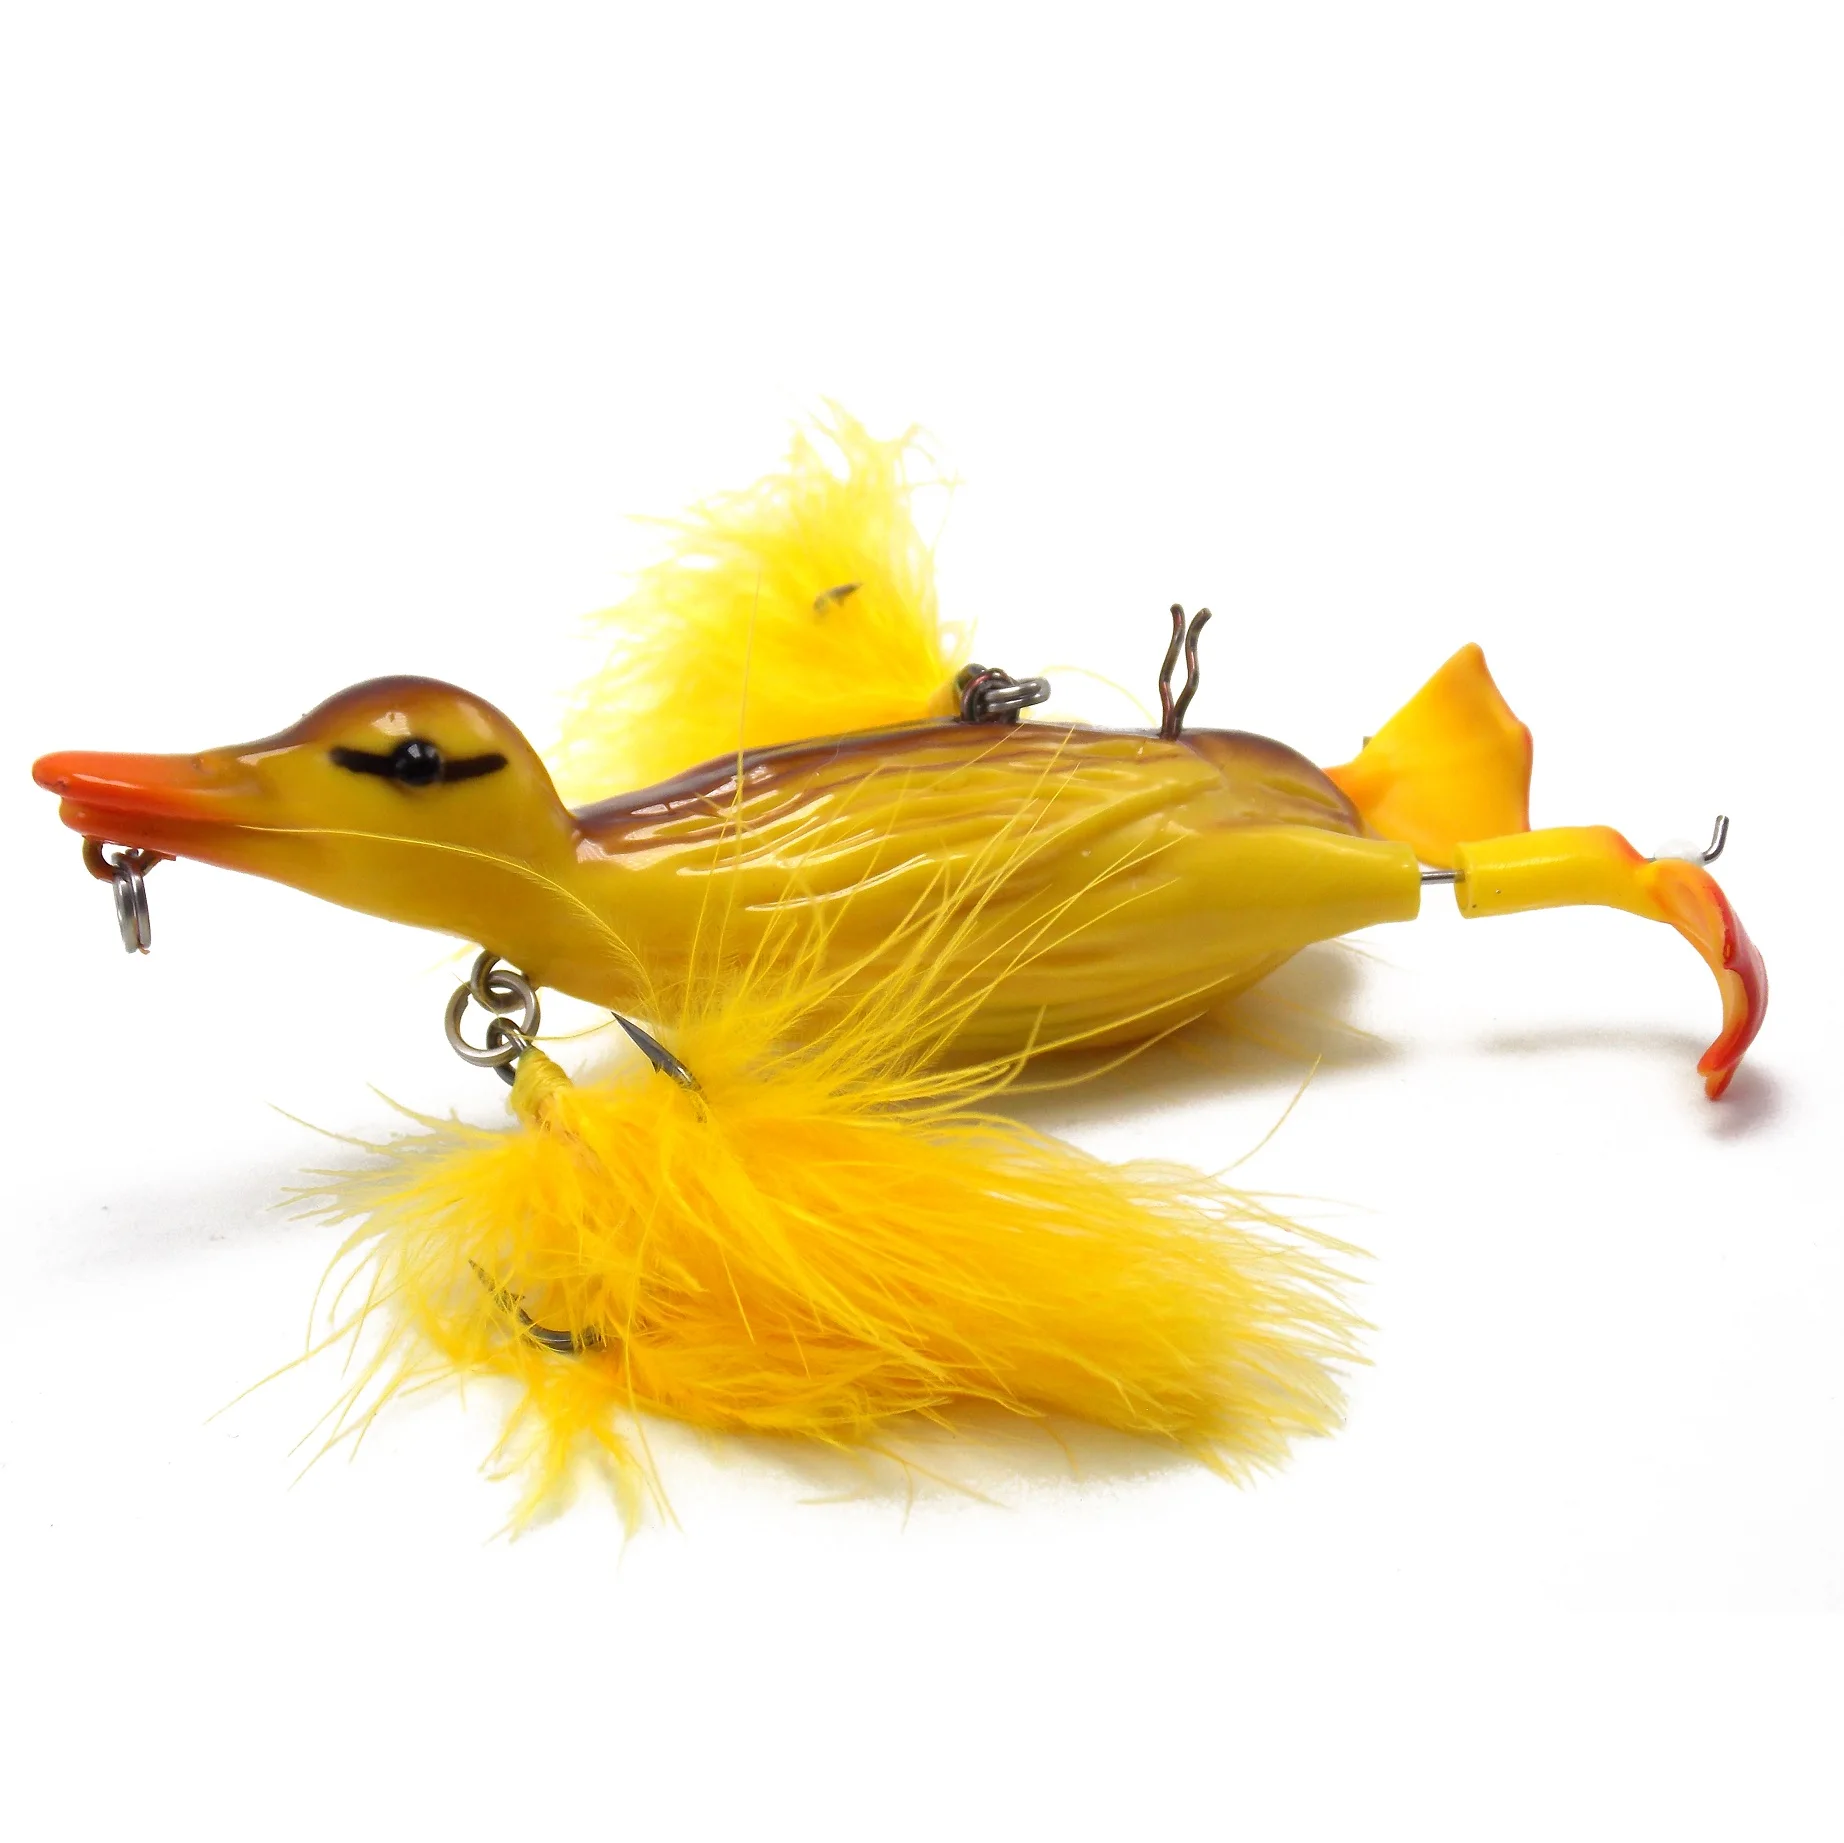 1oz Topwater Orange Duck Hard Fishing Lures with Rotating Flippers 1PK